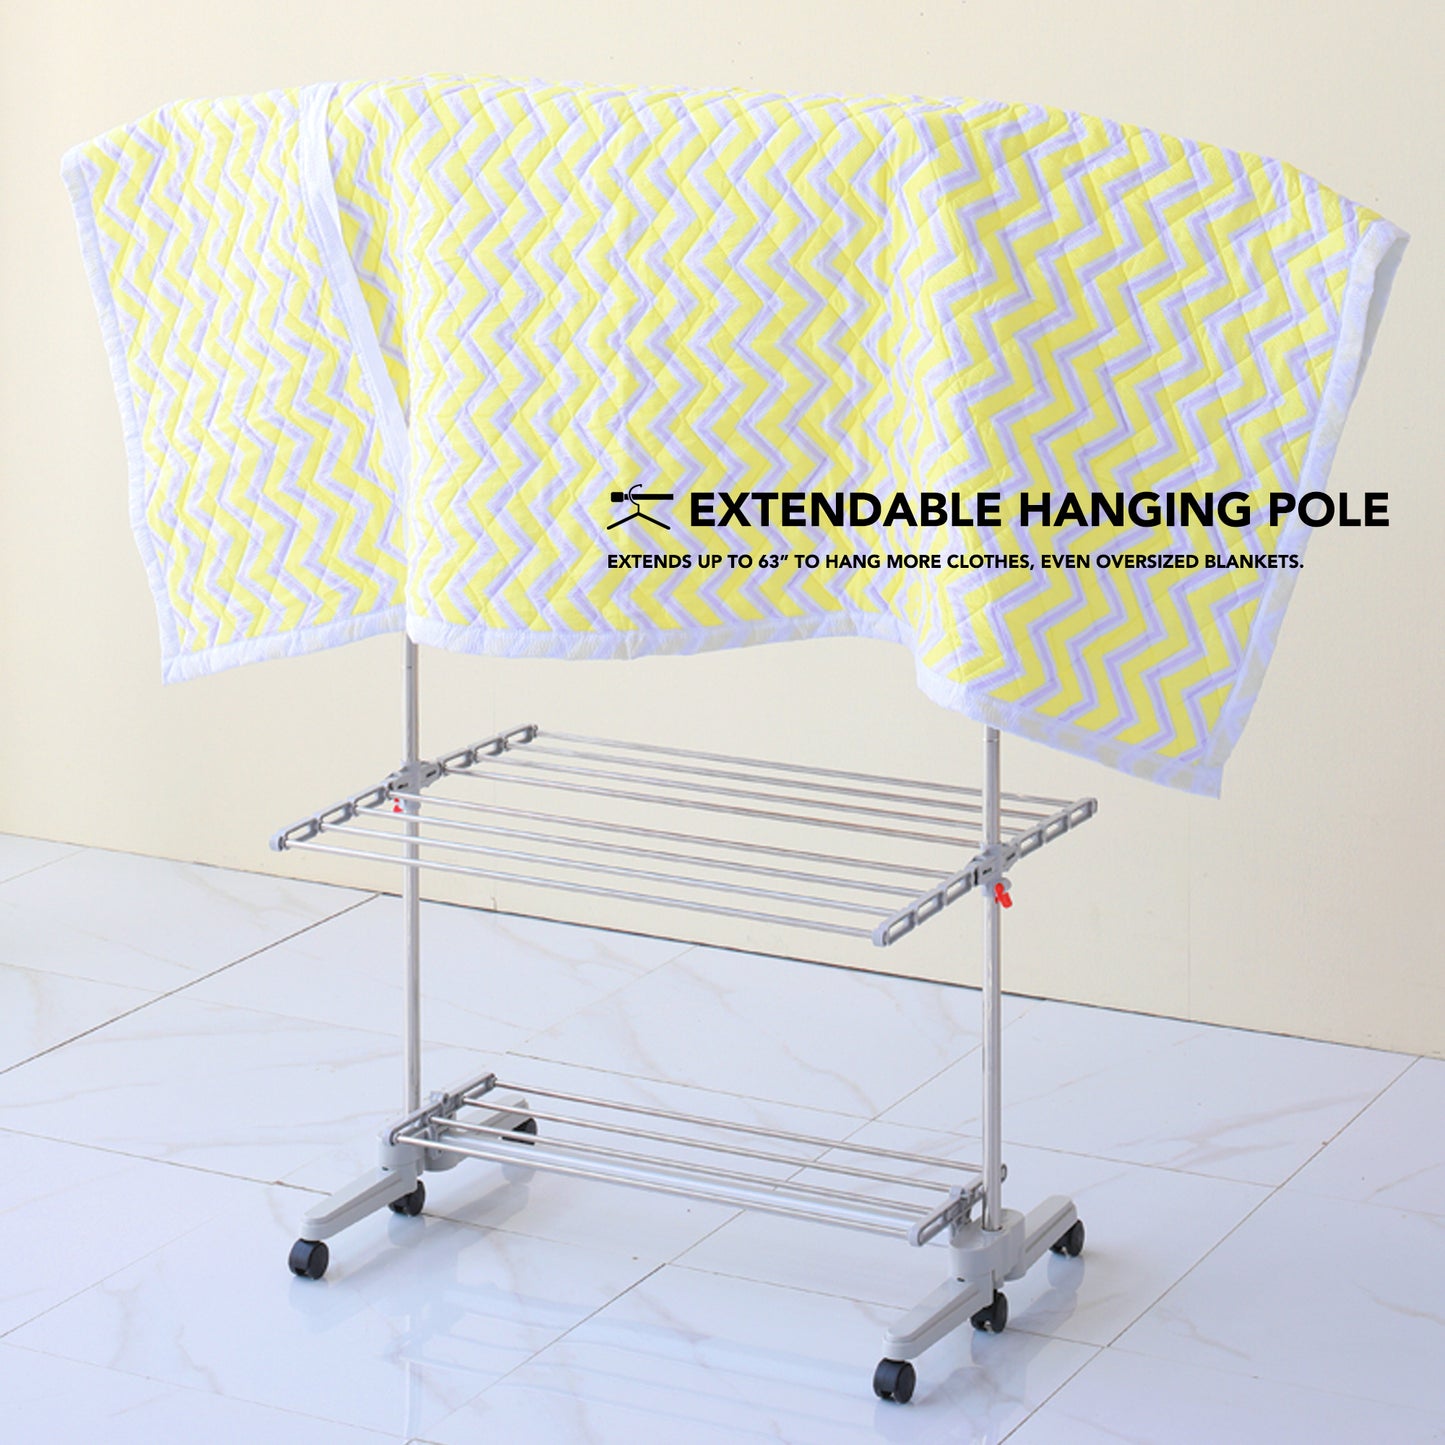 Hanger Type Foldable Clothes Drying Rack